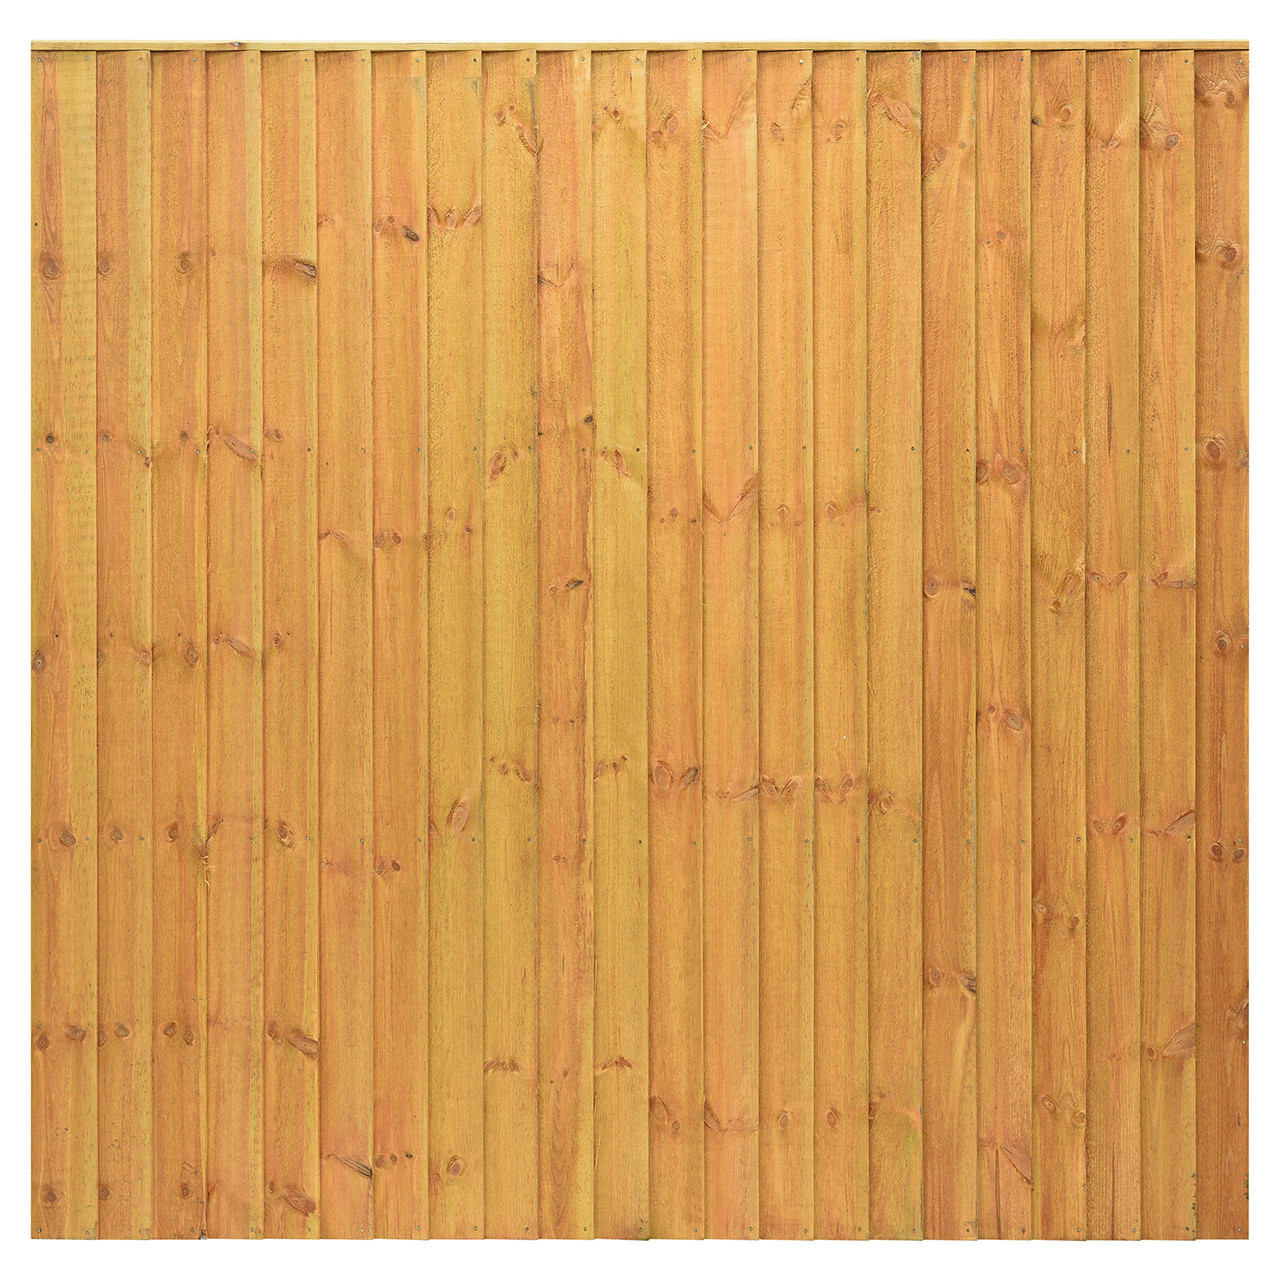 Photograph of Standard Featheredge Panel Golden Brown 1830mm x 1830mm (6' x 6')